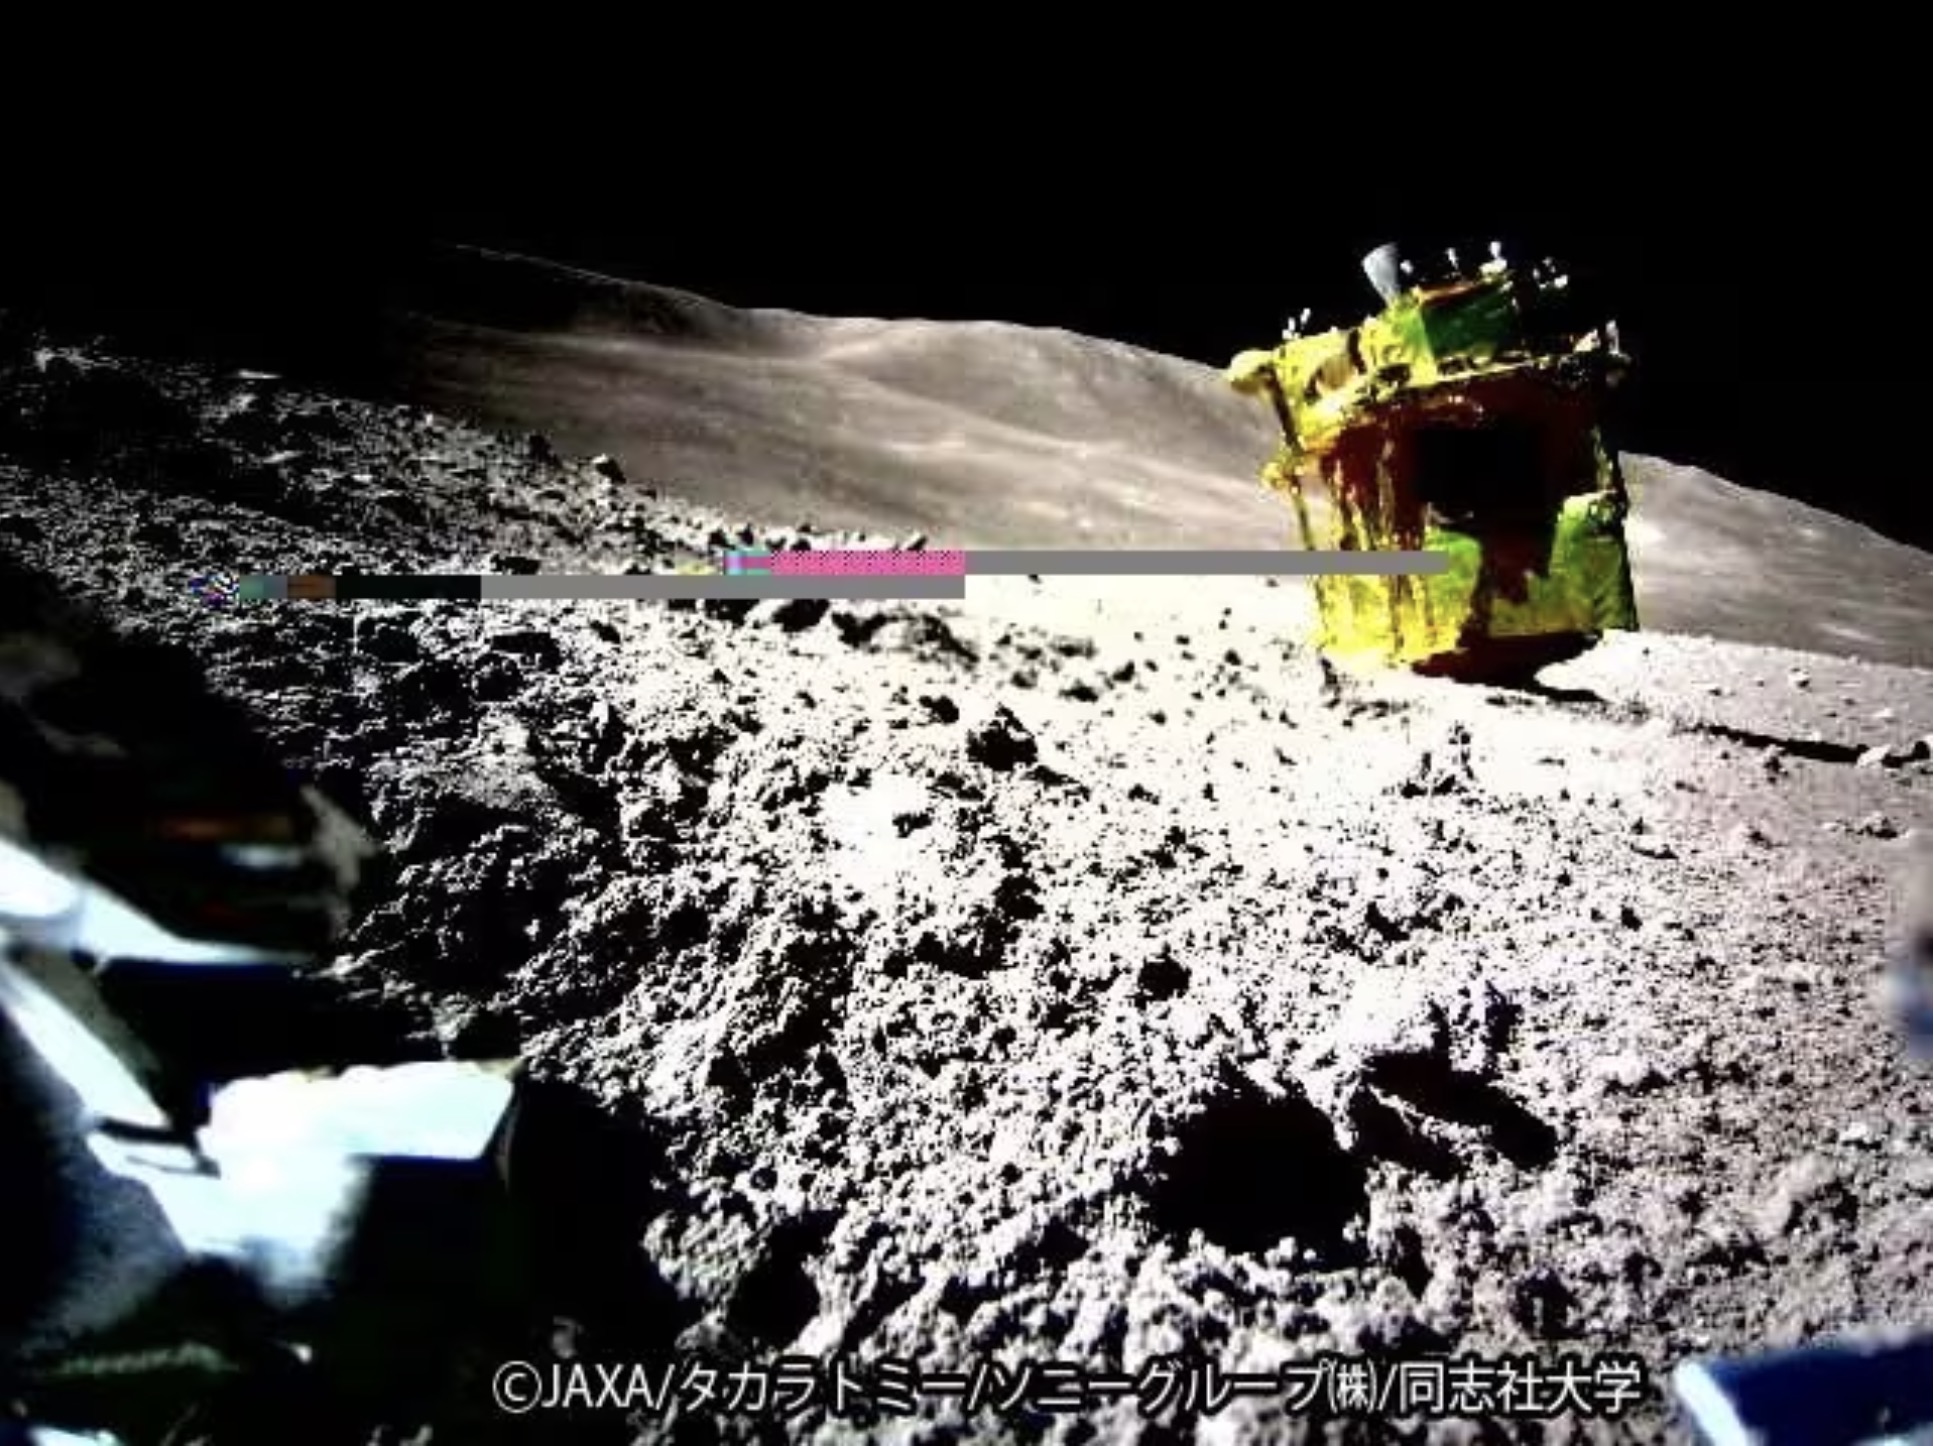 The Smart Lander for Investigating Moon (SLIM), is seen in this handout image taken by an LEV-2 rover on the moon, released on January 25, 2024. /Reuters